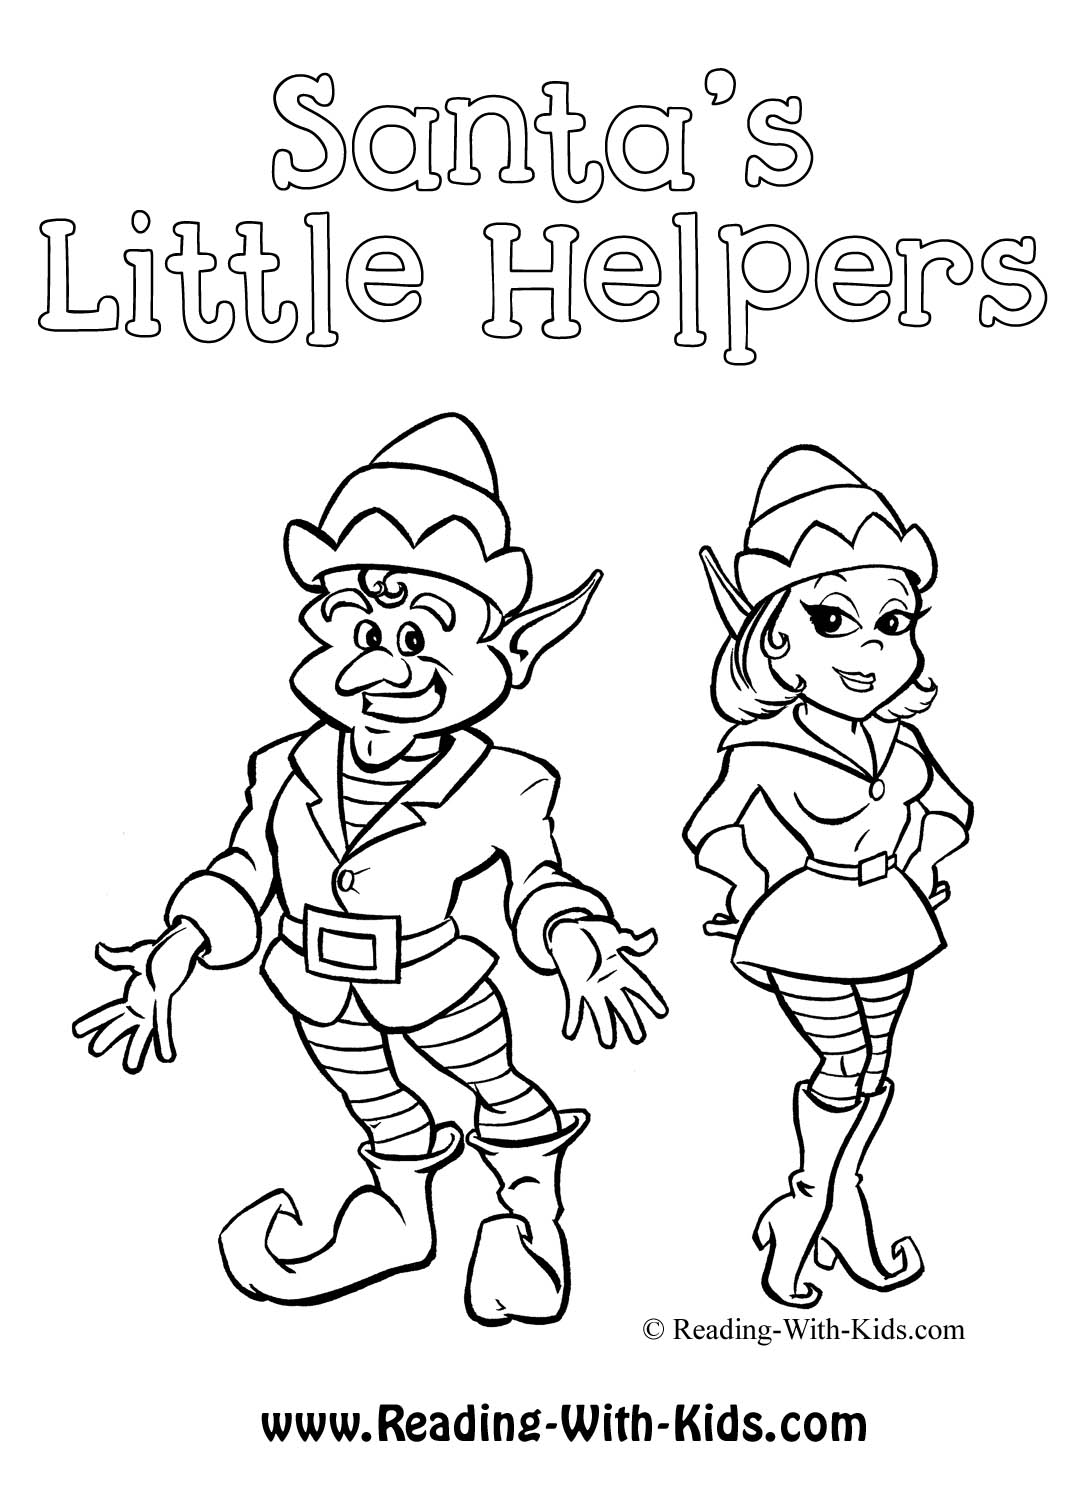  Little Helpers Coloring Pages Christmas | Coloring pages for Christmas | Christmas trees coloring pages